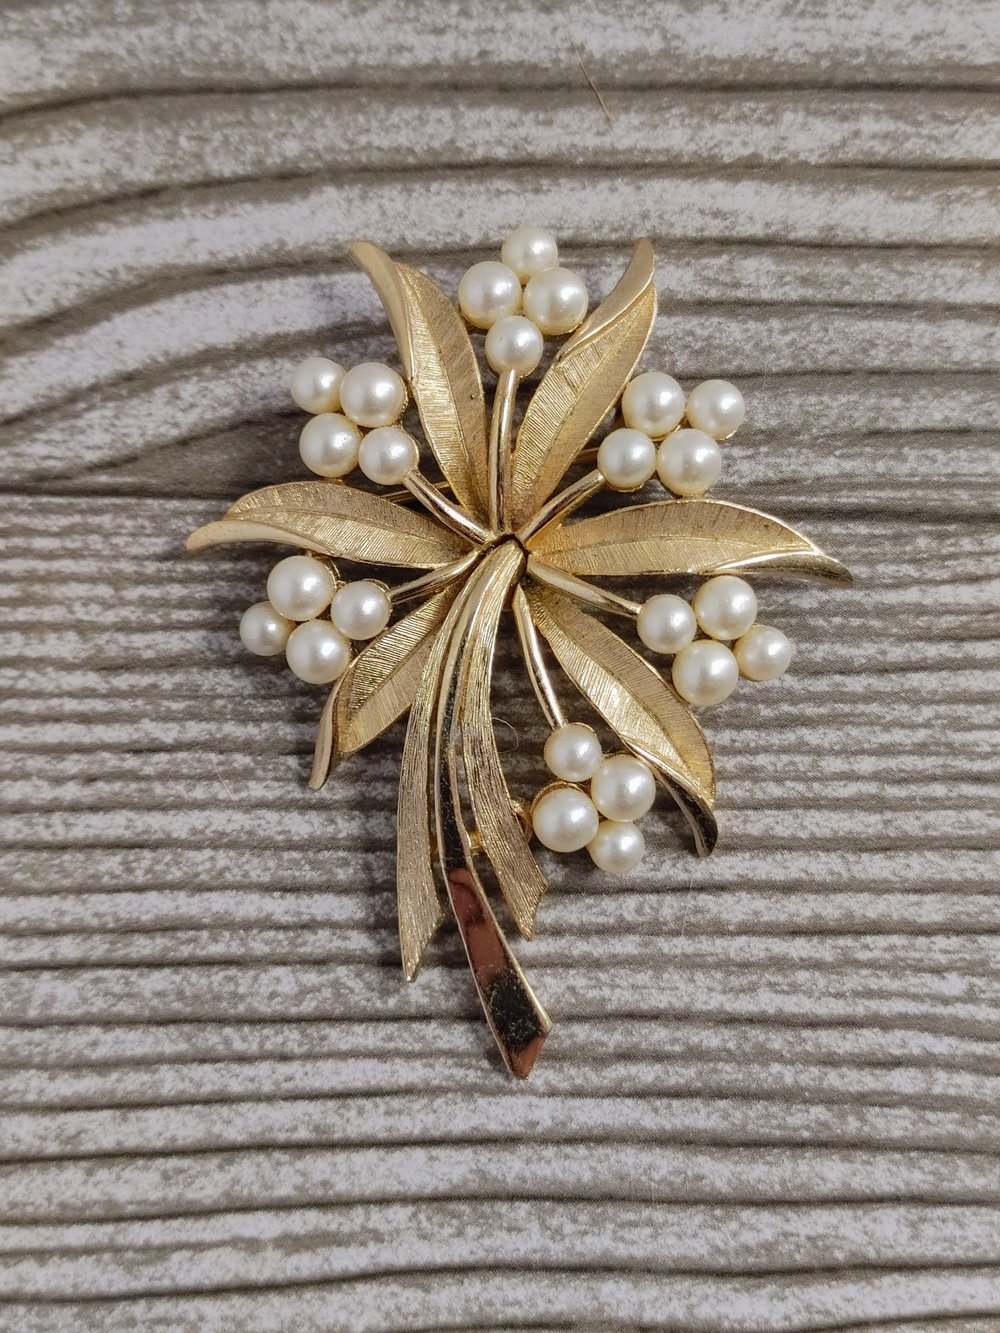 Vintage Trifari Gold Flower Brooch with Pearl Accents — Vintage Virtue